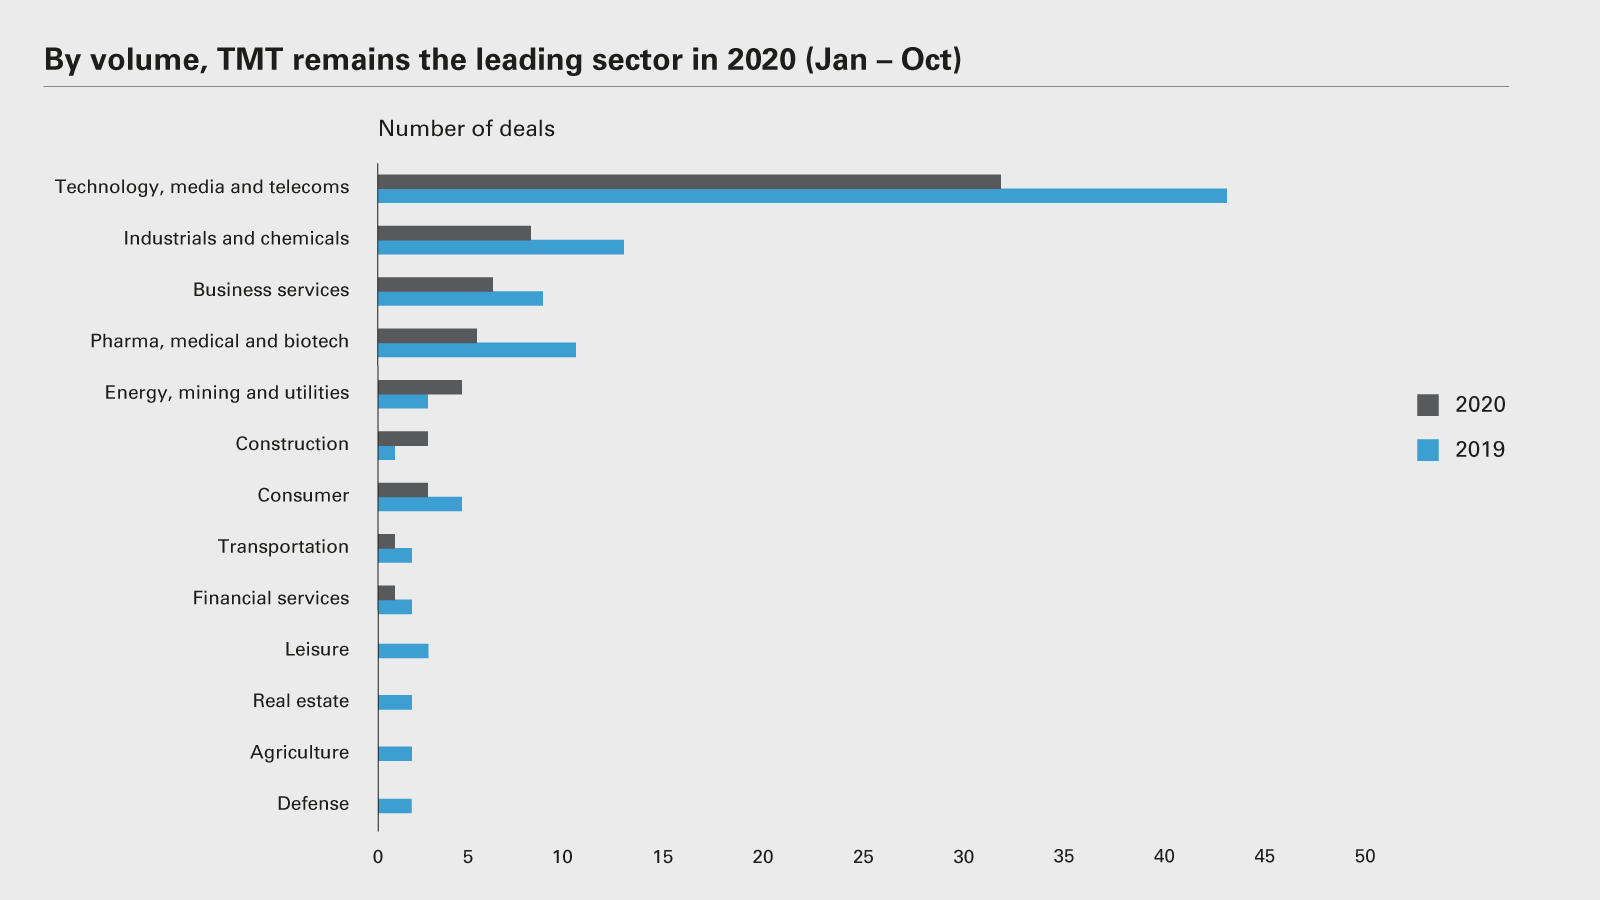 By volume, TMT remains the leading sector in 2020 (Jan - Oct)